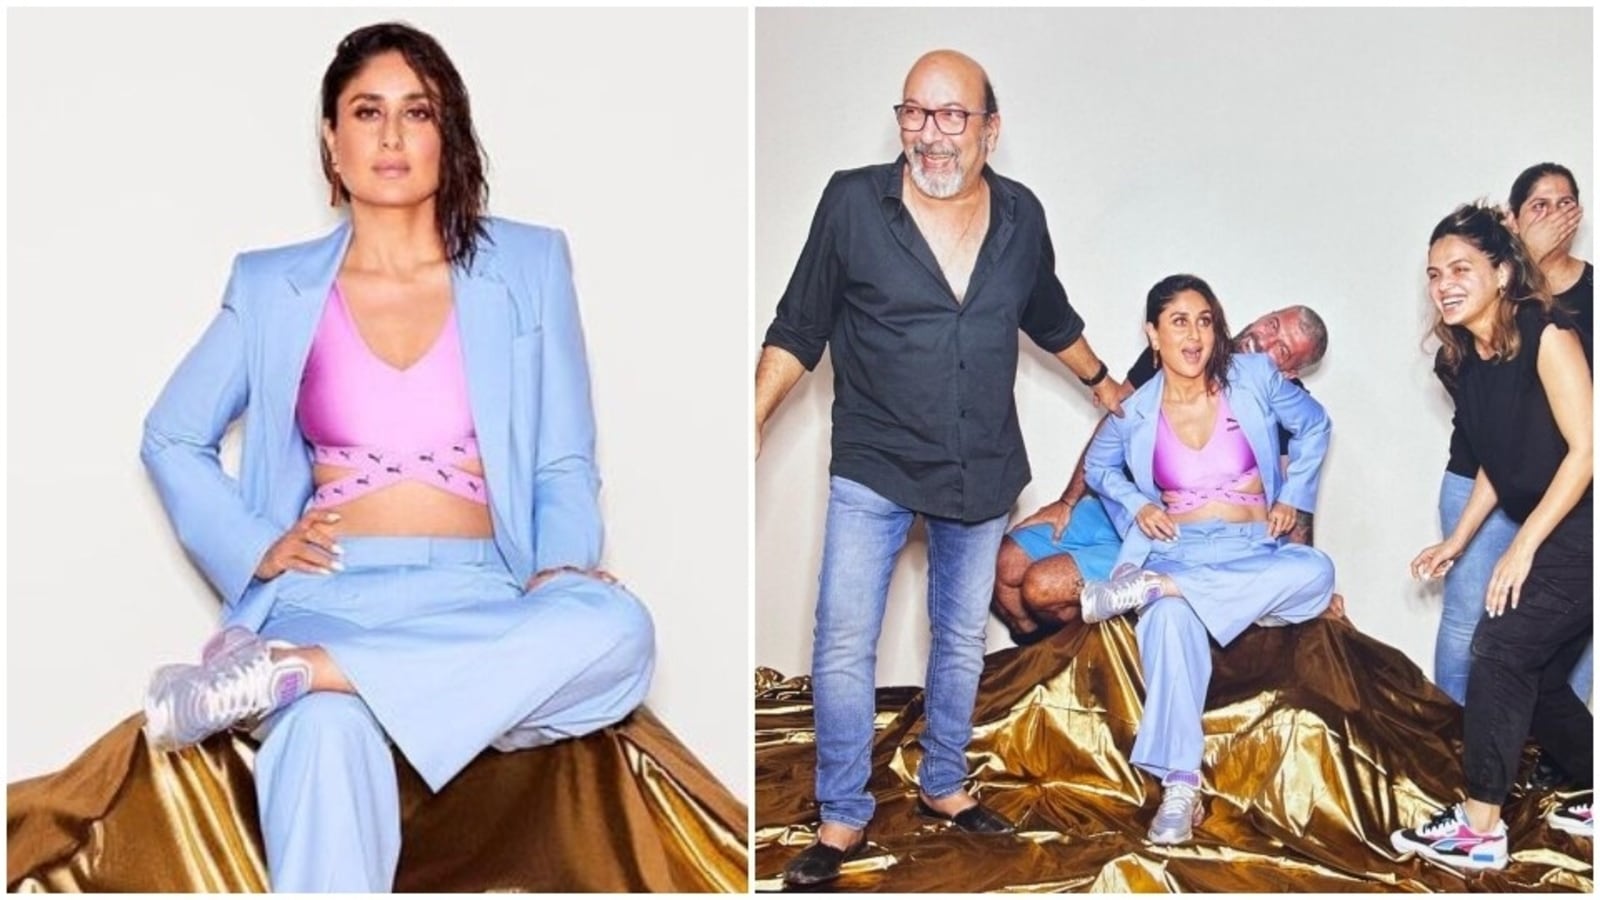 Boss Lady' Kareena Kapoor shows how to glam up pantsuit with sultry sports  bra for latest photos, we love it: See here | Fashion Trends - Hindustan  Times